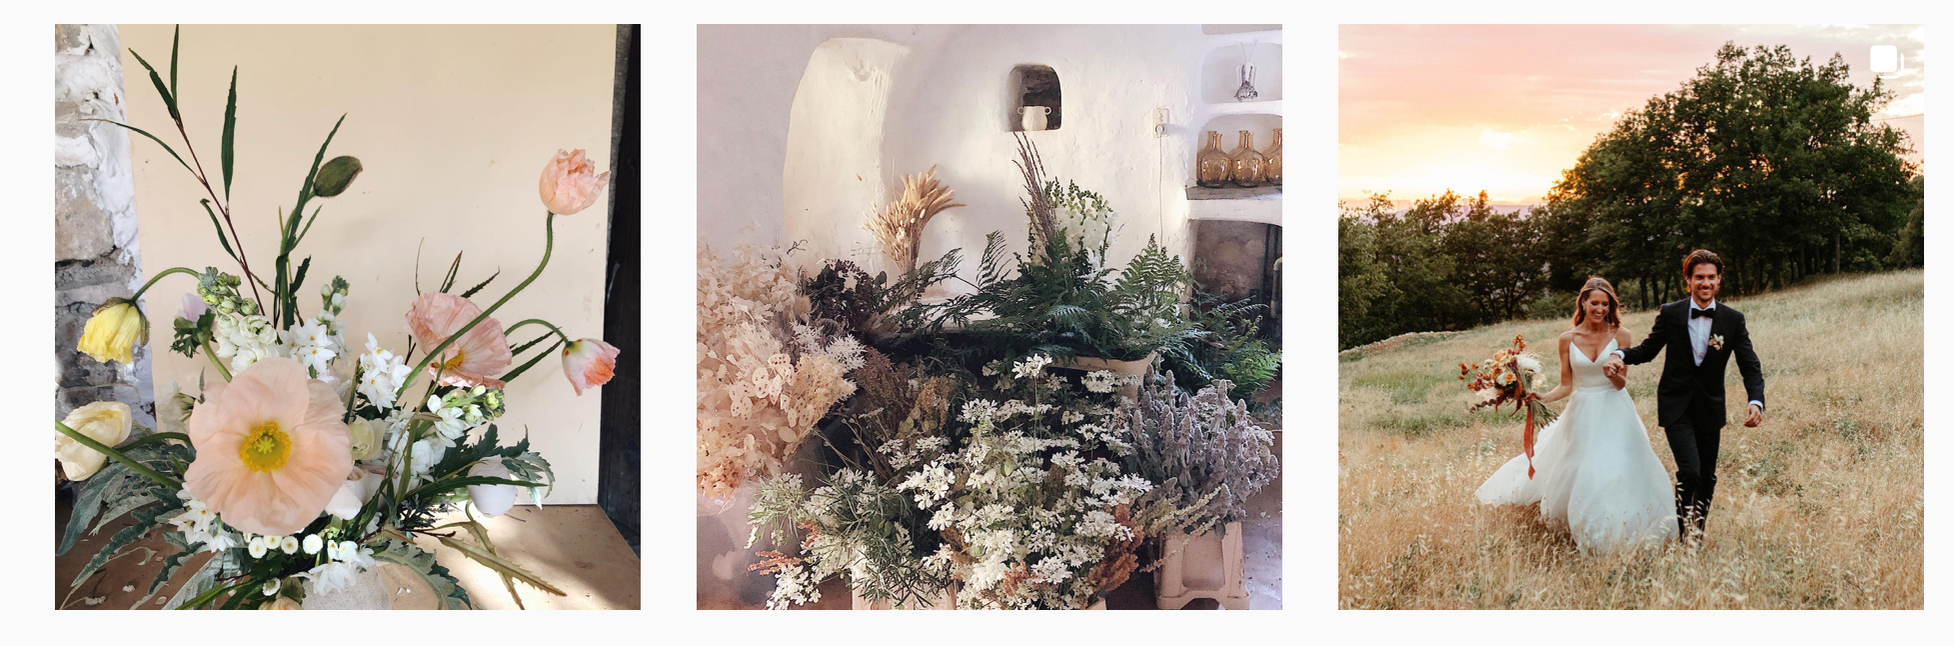 Provence and French Riviera Wedding Florist. Floral atelier for luxury weddings. Provence France wedding planner. Provence wedding photographer. Destination wedding photographer. 